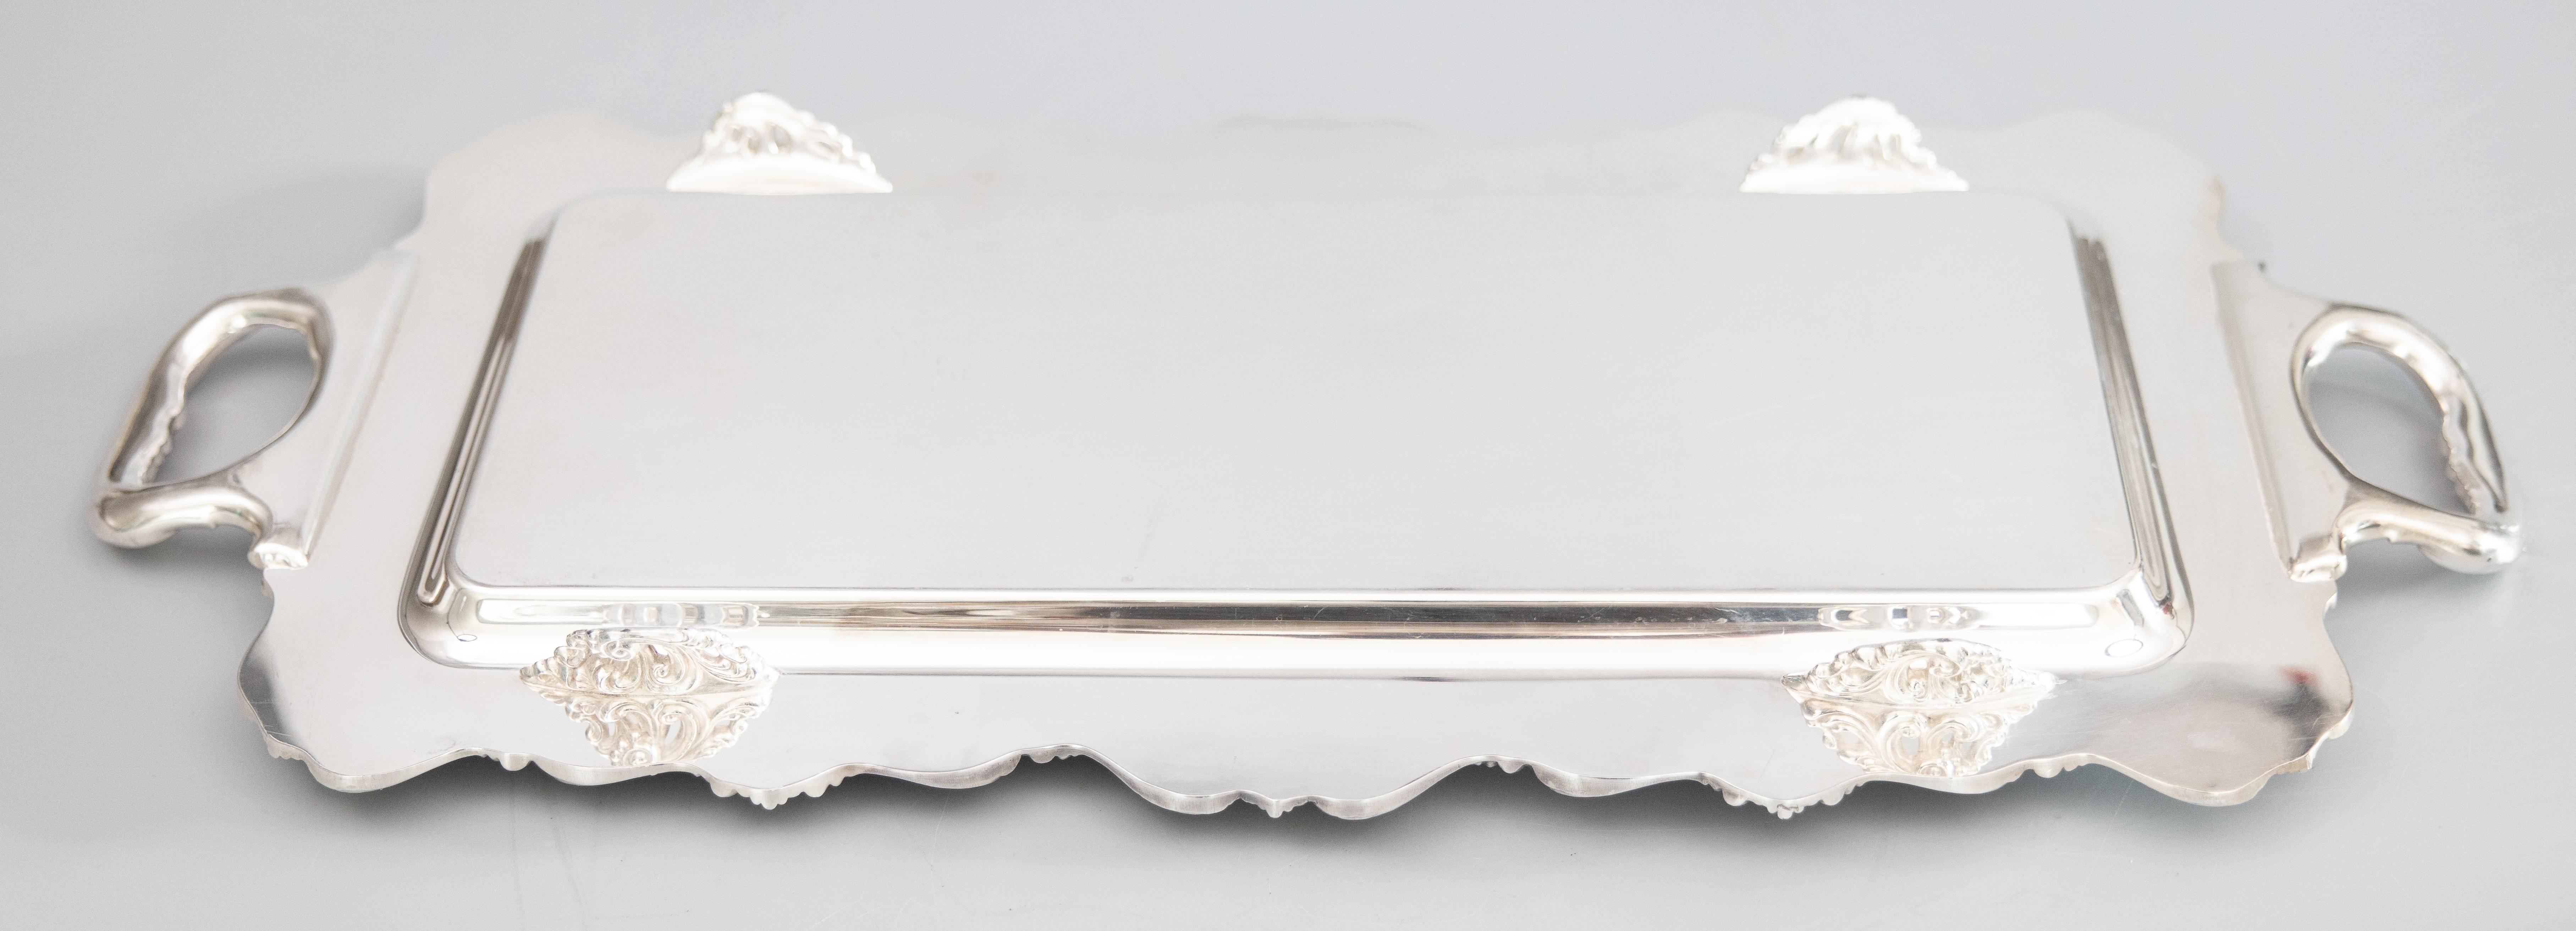 1930s Silver Plate Oblong Footed Tray With Handles by W&S Blackinton  3